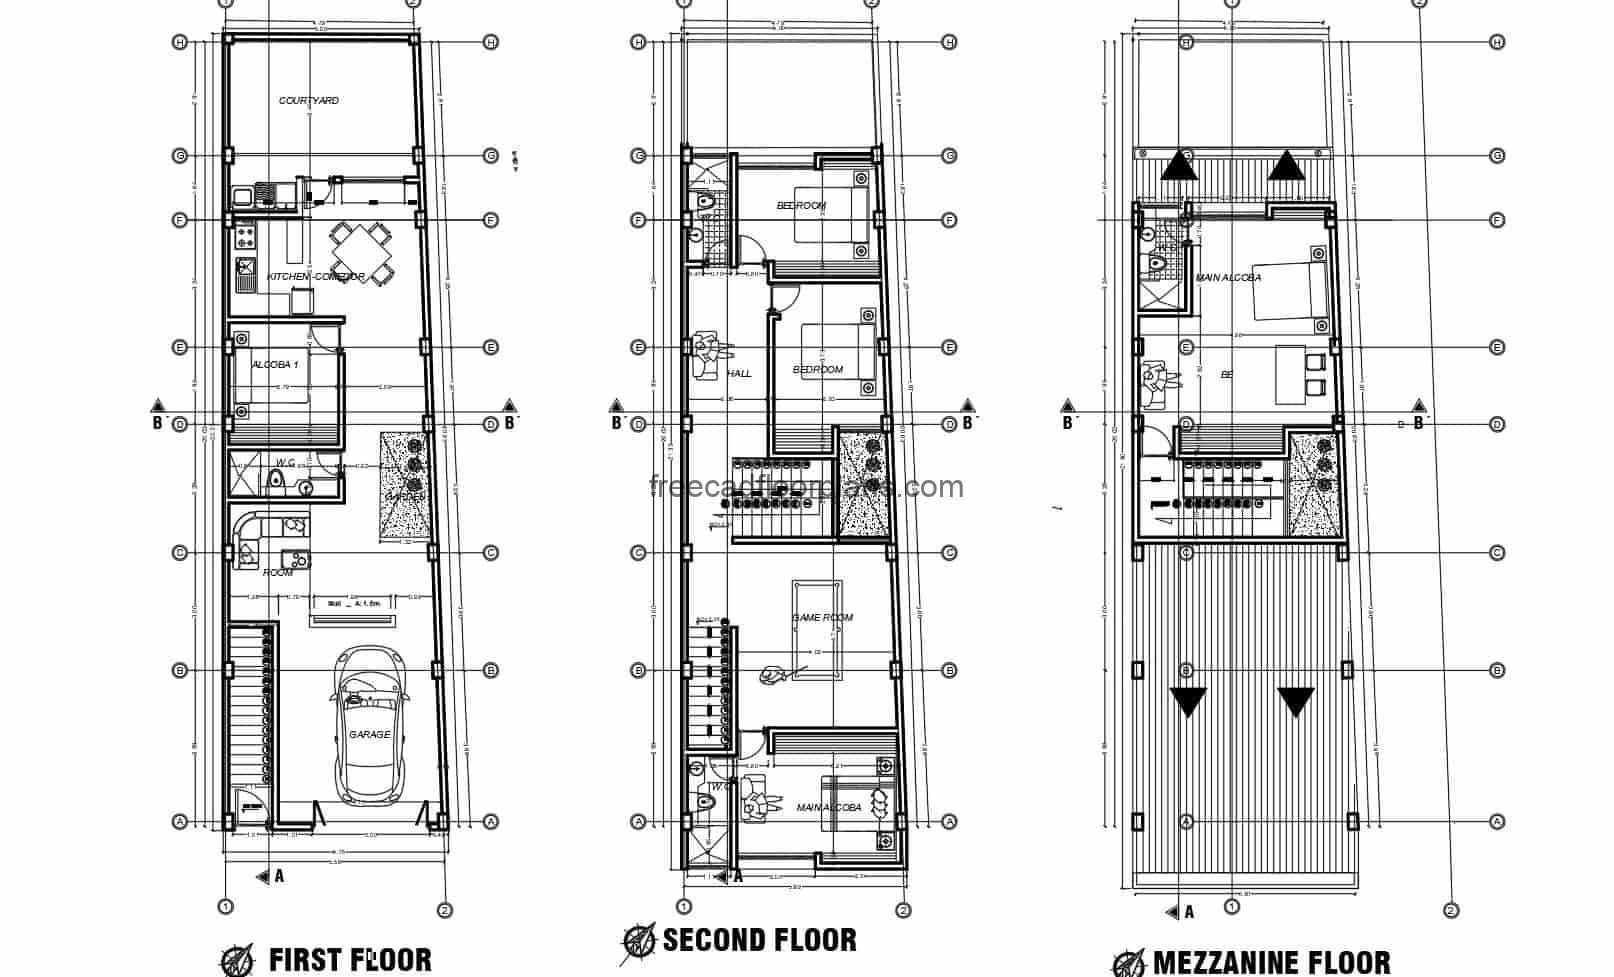 Two-level house with mezzanine, complete architectural plans with dimensions, elevations and sections, foundation plans with details in Autocad DWG format